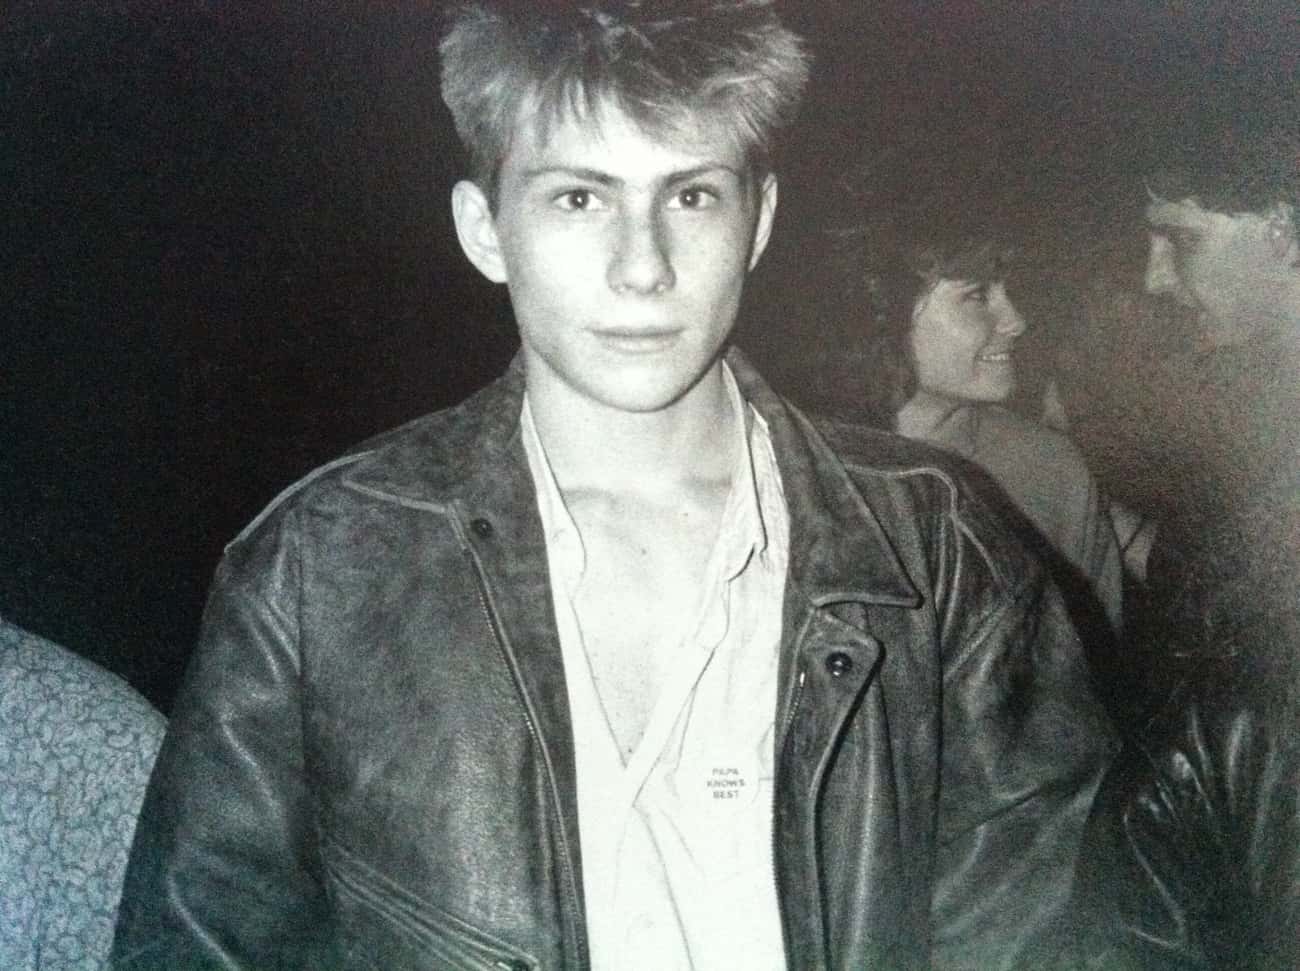 Young Christian Slater in Black Leather Jacket and White Buttondown